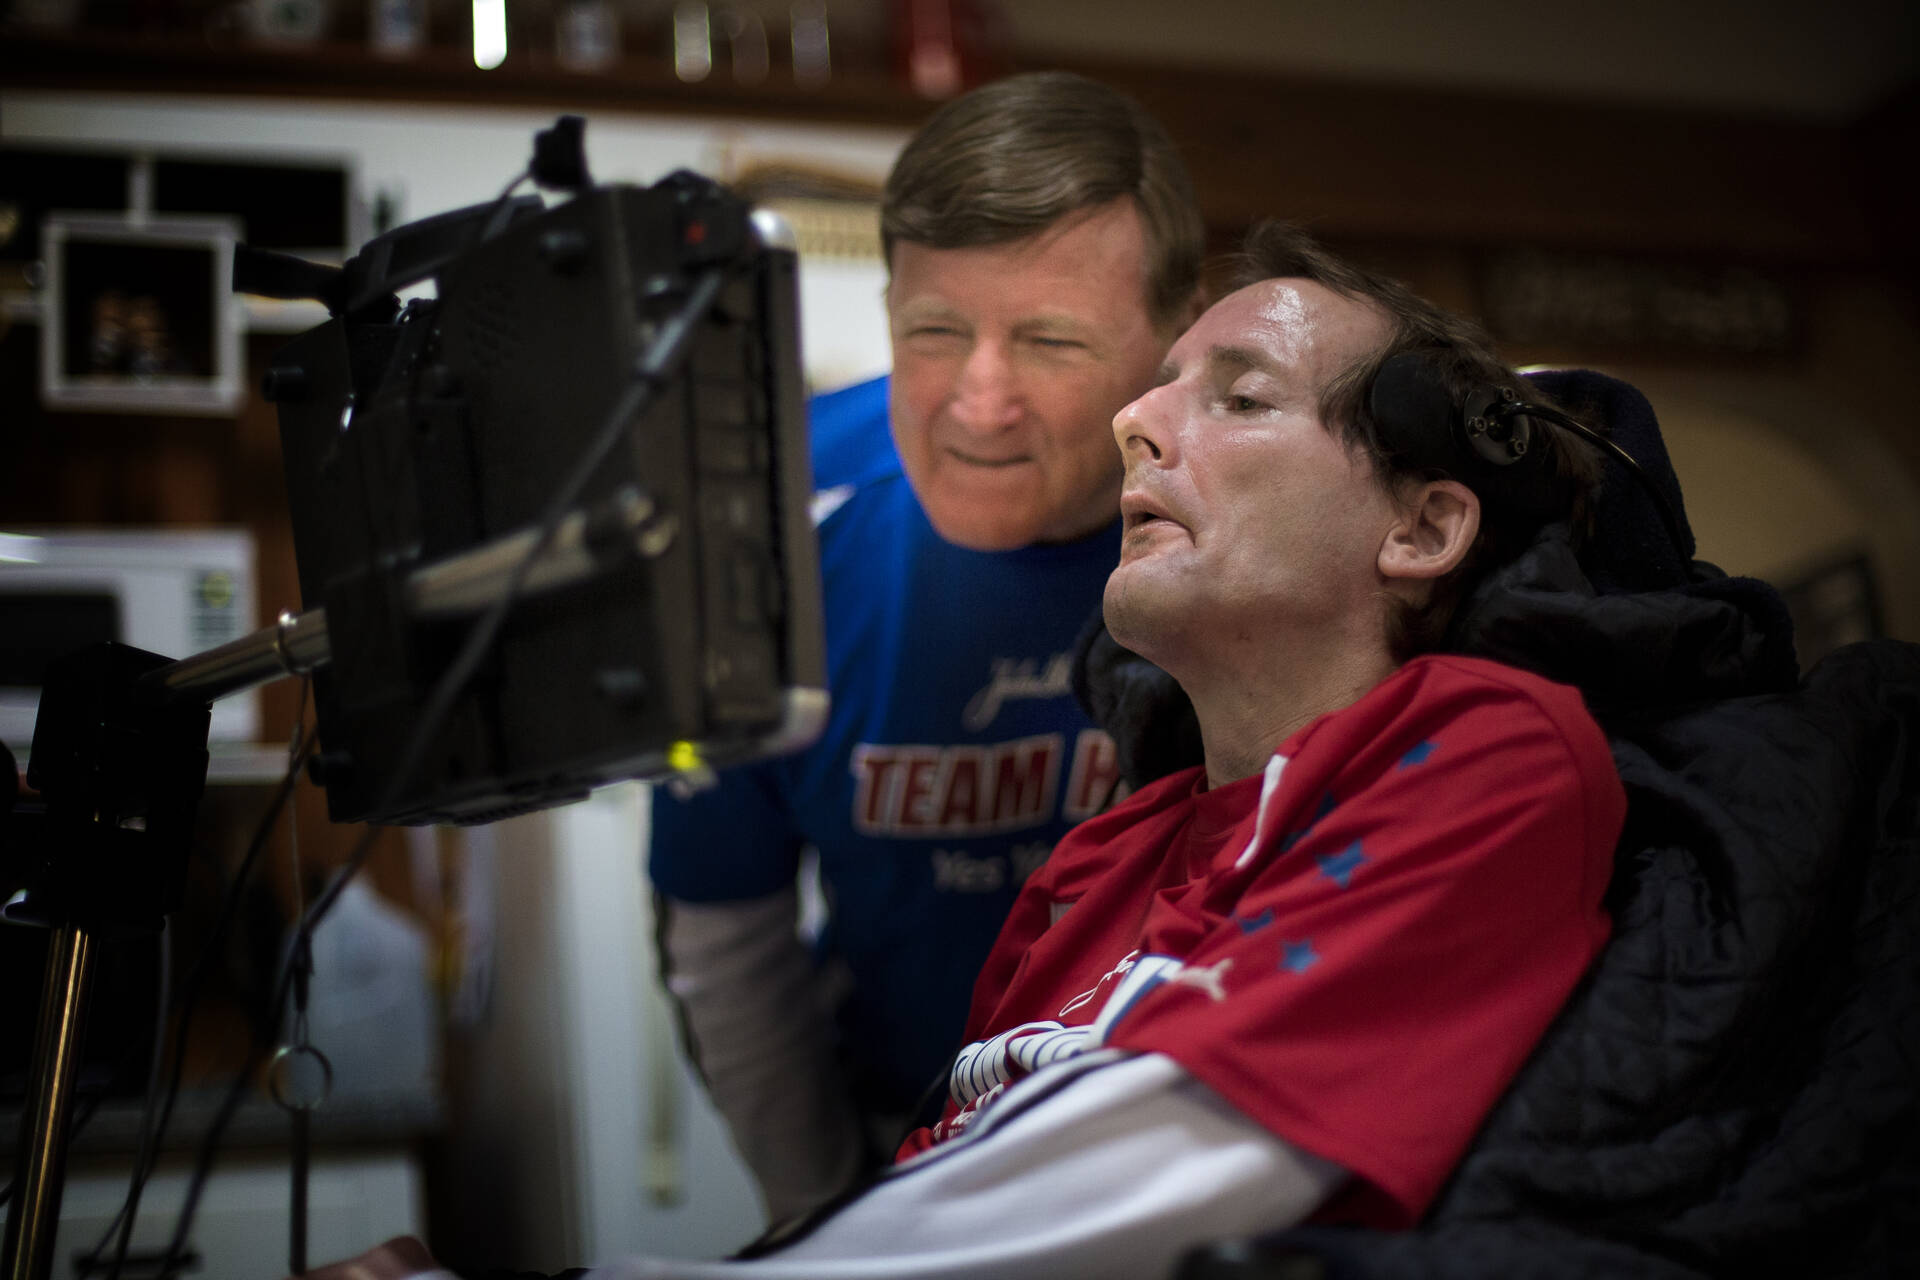 Team Hoyt, as they're often called, is pictured here in 2014. The father-son duo drew spectators and fans from all over who loved to cheer them on as they competed in the Boston Marathon. The late Rick Hoyt and his son, Dick, were marathon stalwarts since 1981. The elder Hoyt died at age 80 in 2021. (Jesse Costa/WBUR)